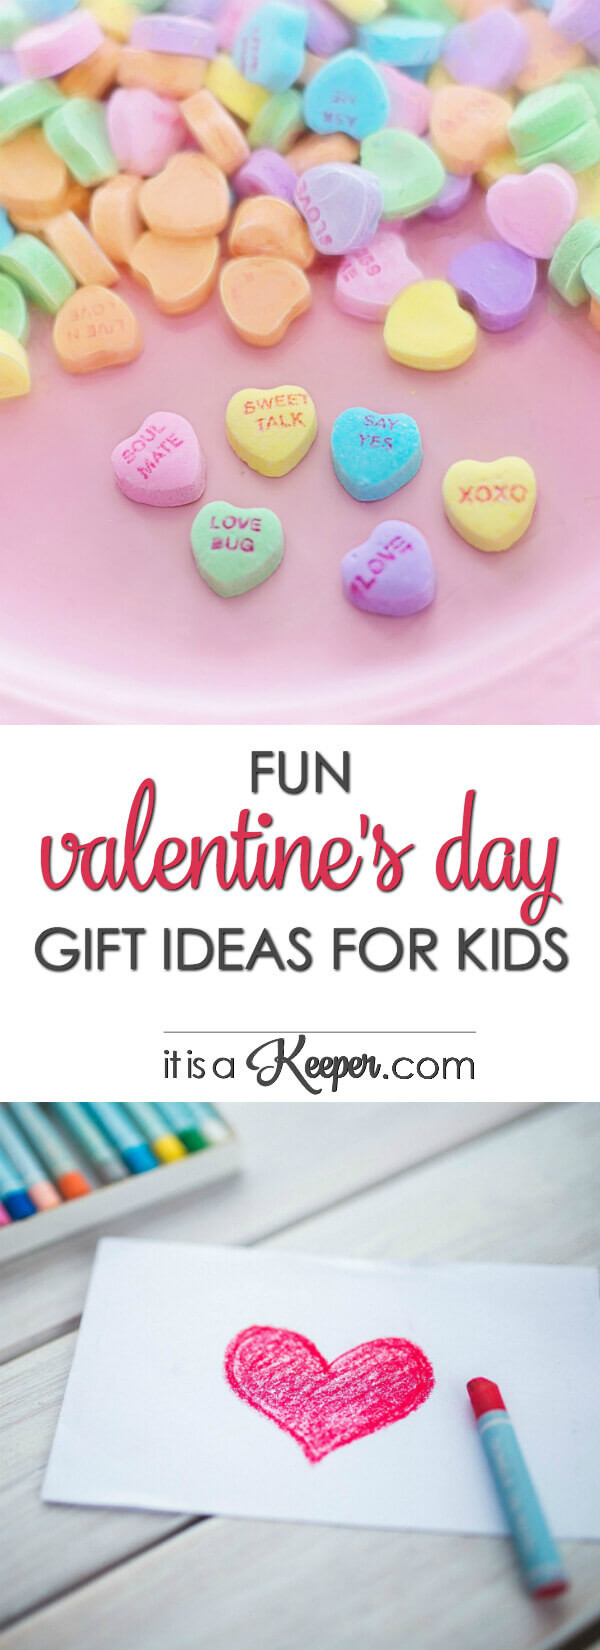 Funny Valentines Day Gift Ideas
 Fun Valentine s Day Gift Ideas for Kids